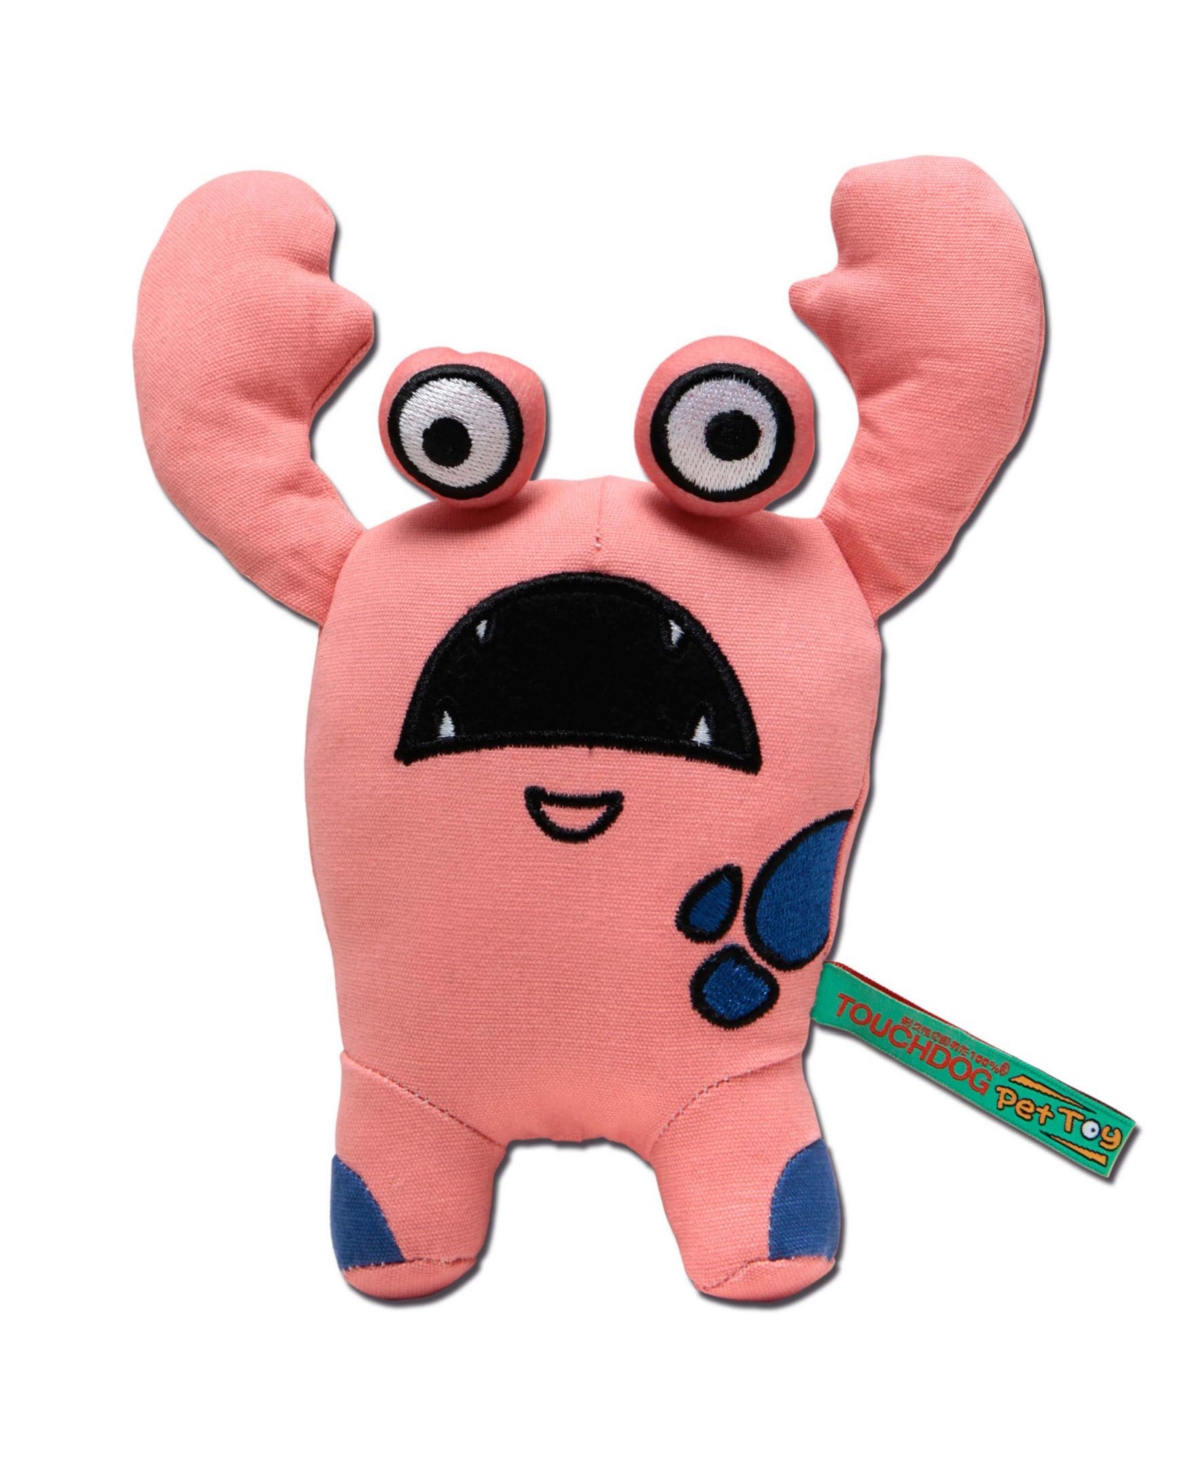 Cartoon Up-For-Crabs Monster Plush Dog Toy - Pink